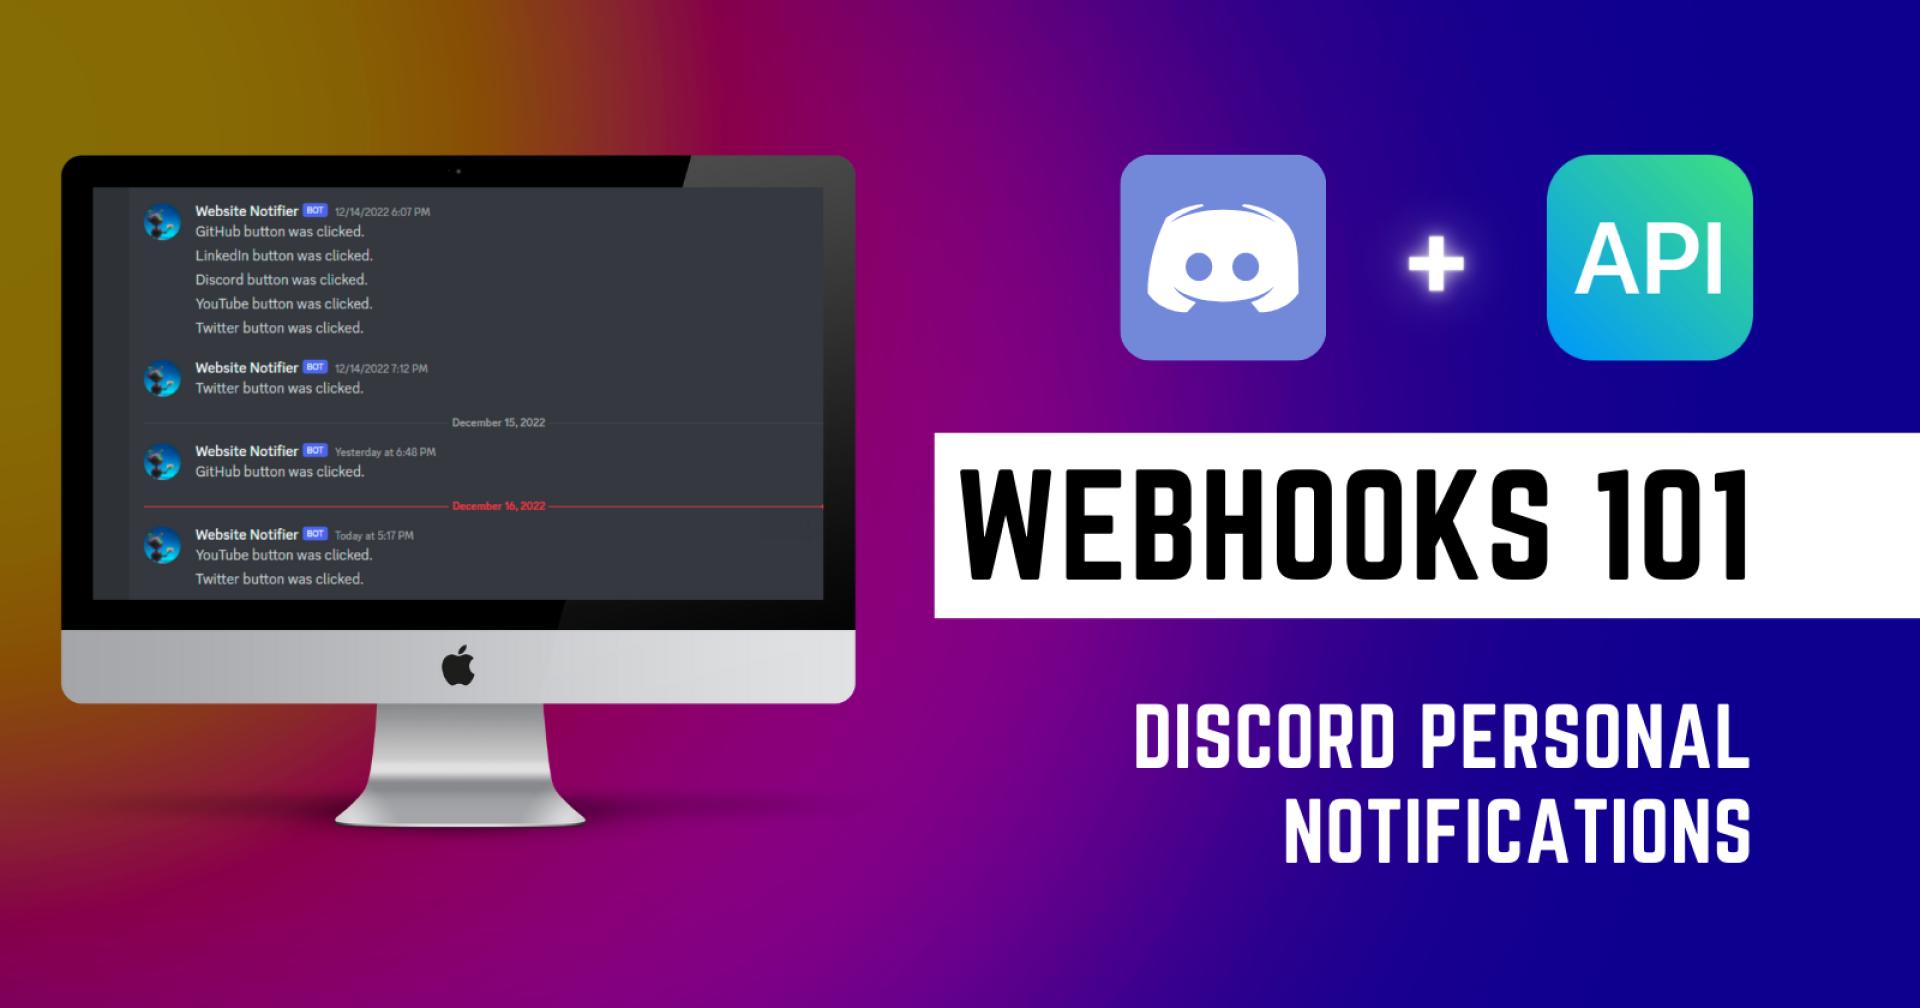 🎣 Webhooks Demystified - Get Real-Time Personal Notifications with Discord Webhooks